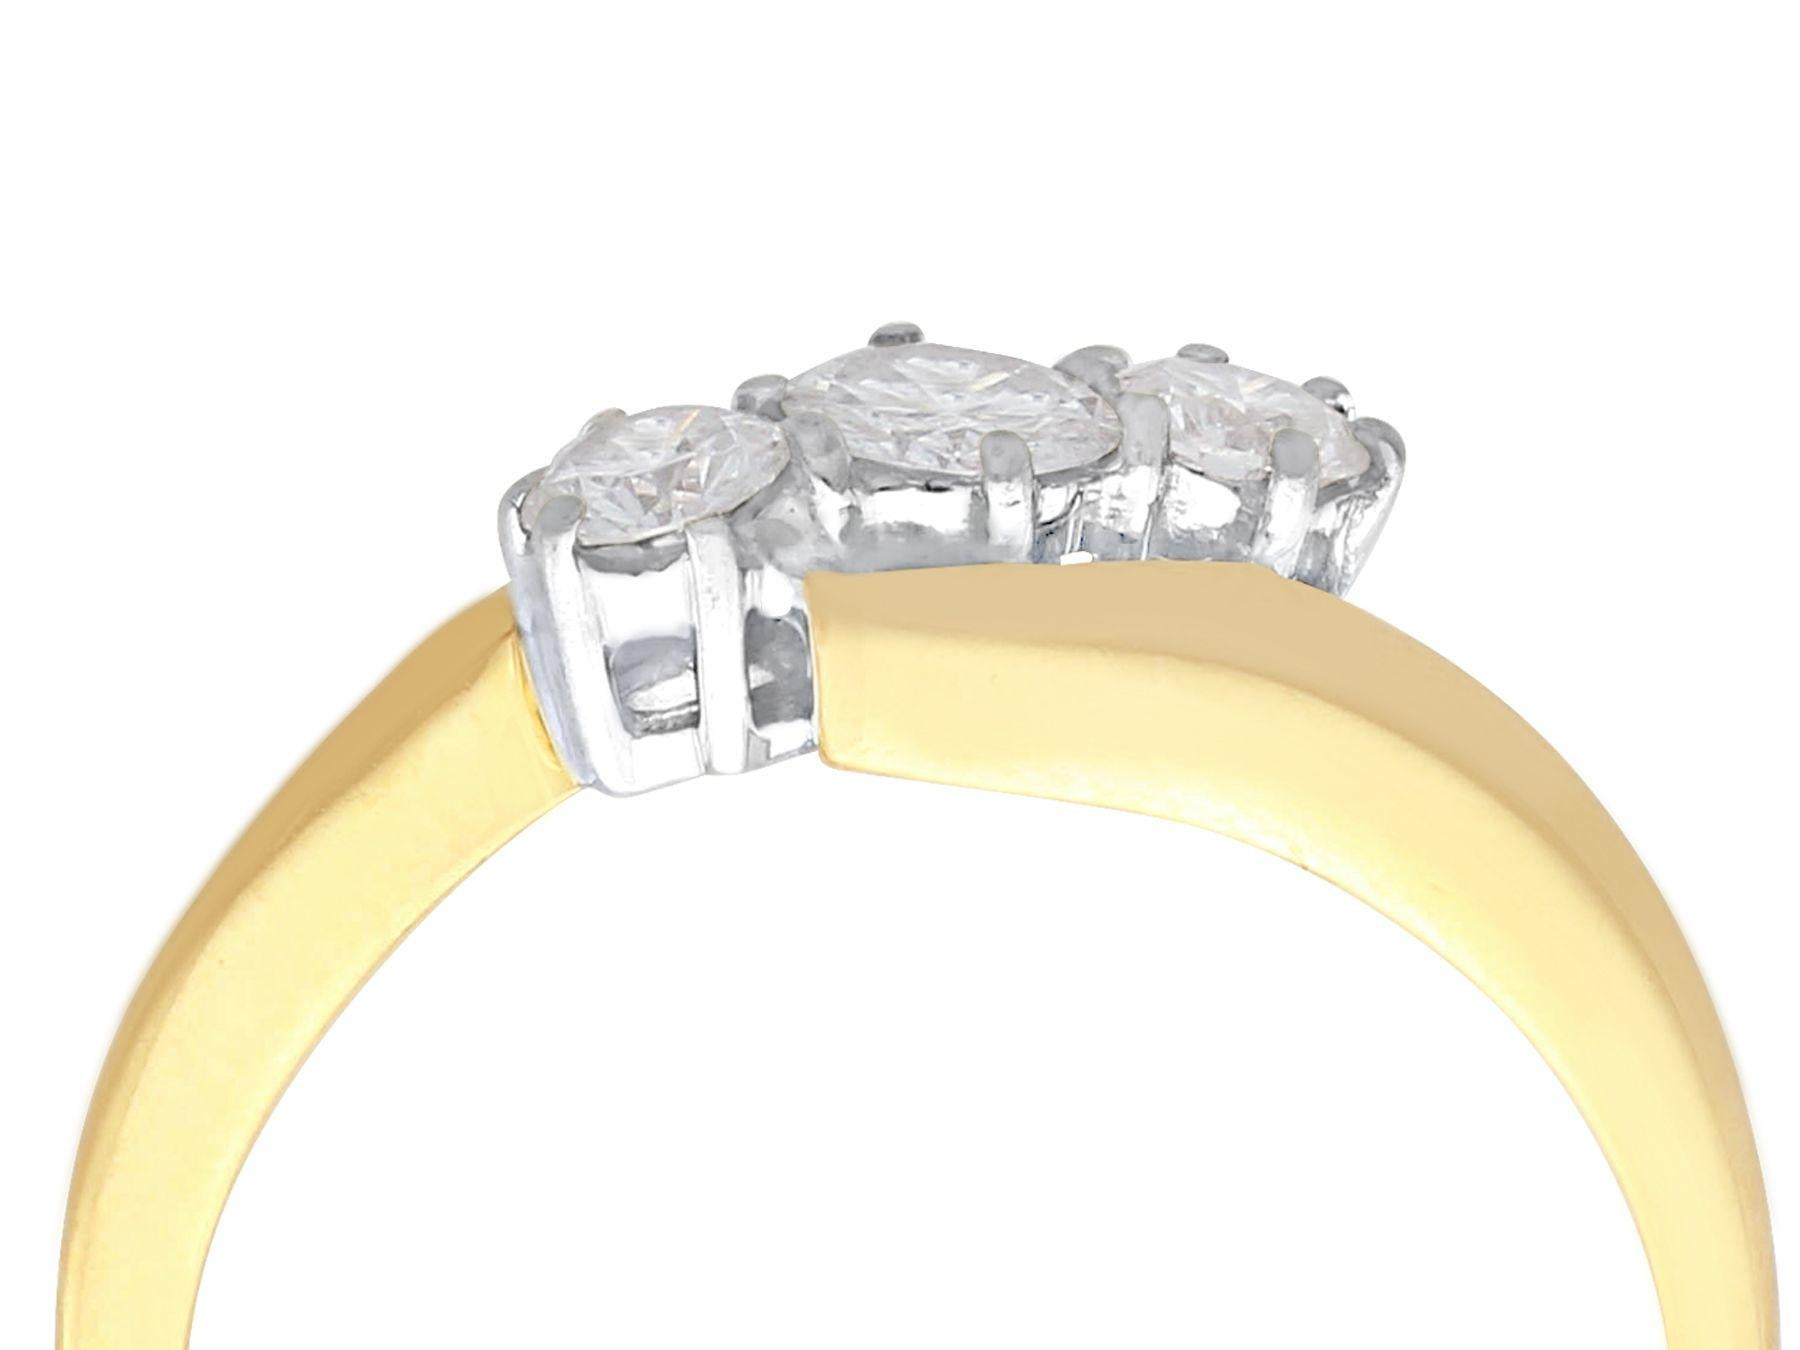 A fine and impressive contemporary 0.46 carat diamond and 18 karat yellow gold, 18 karat white gold set trilogy twist ring; part of our diamond jewelry and estate jewelry collections.

This fine and impressive trilogy twist ring has been crafted in